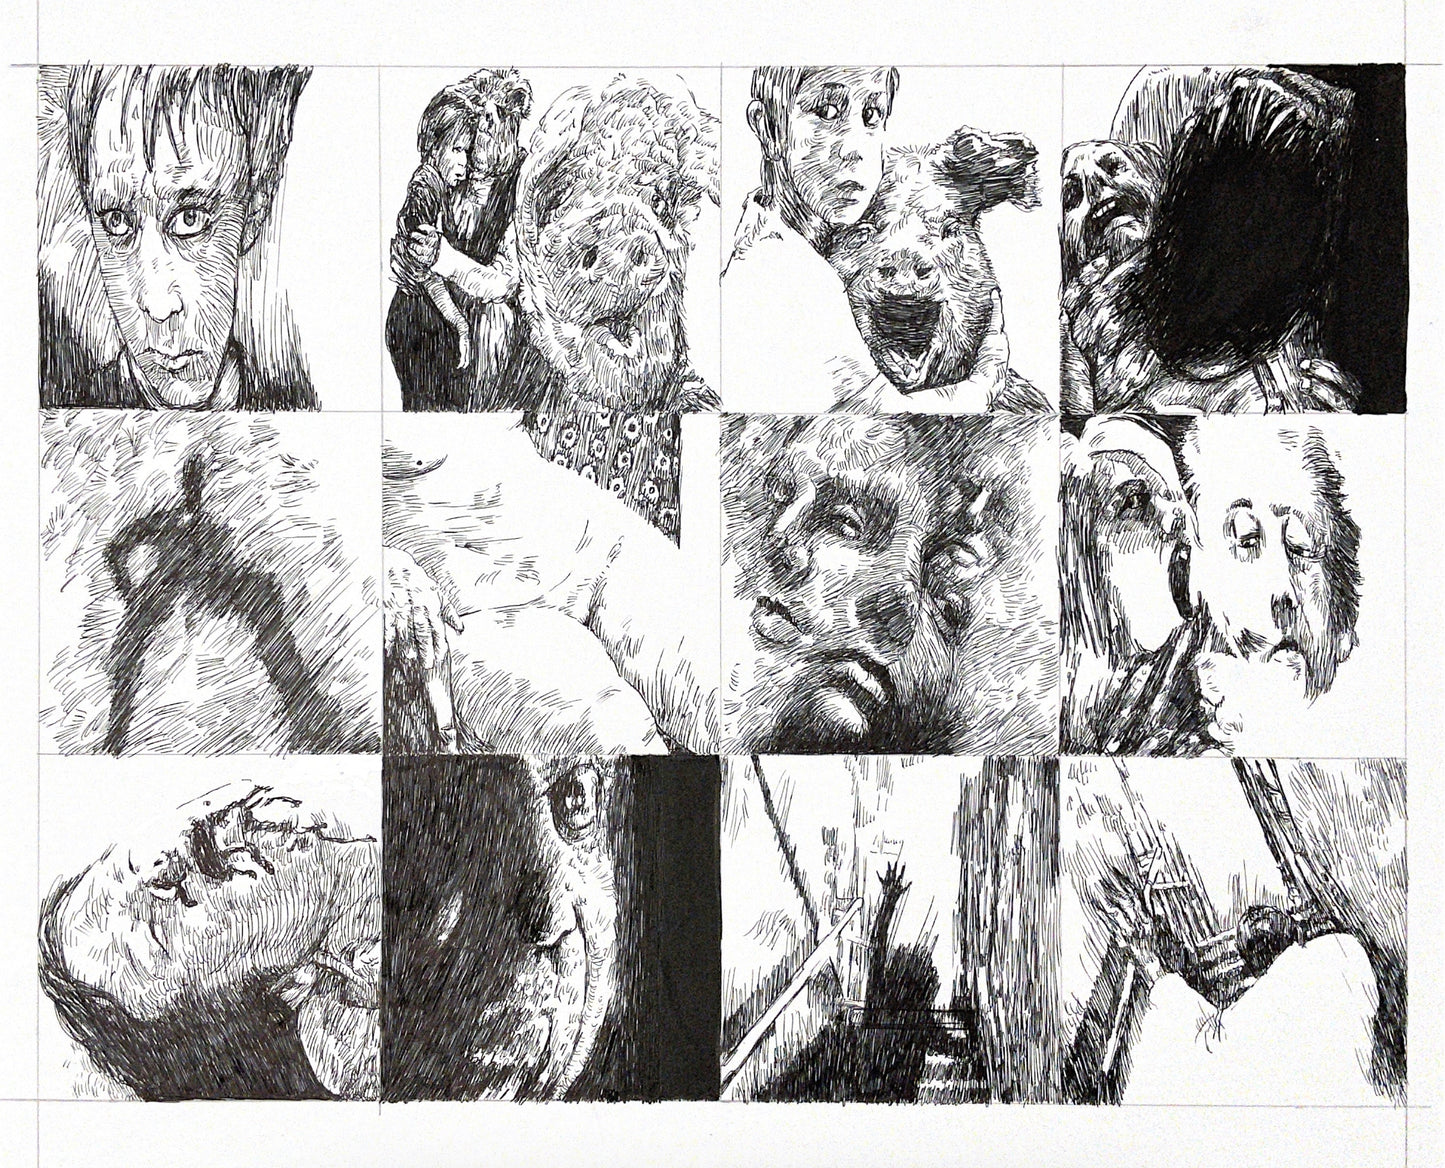 Graphic novel panels, featuring ink drawings, close ups of people, the morphine of an image of one person into multiple faces.